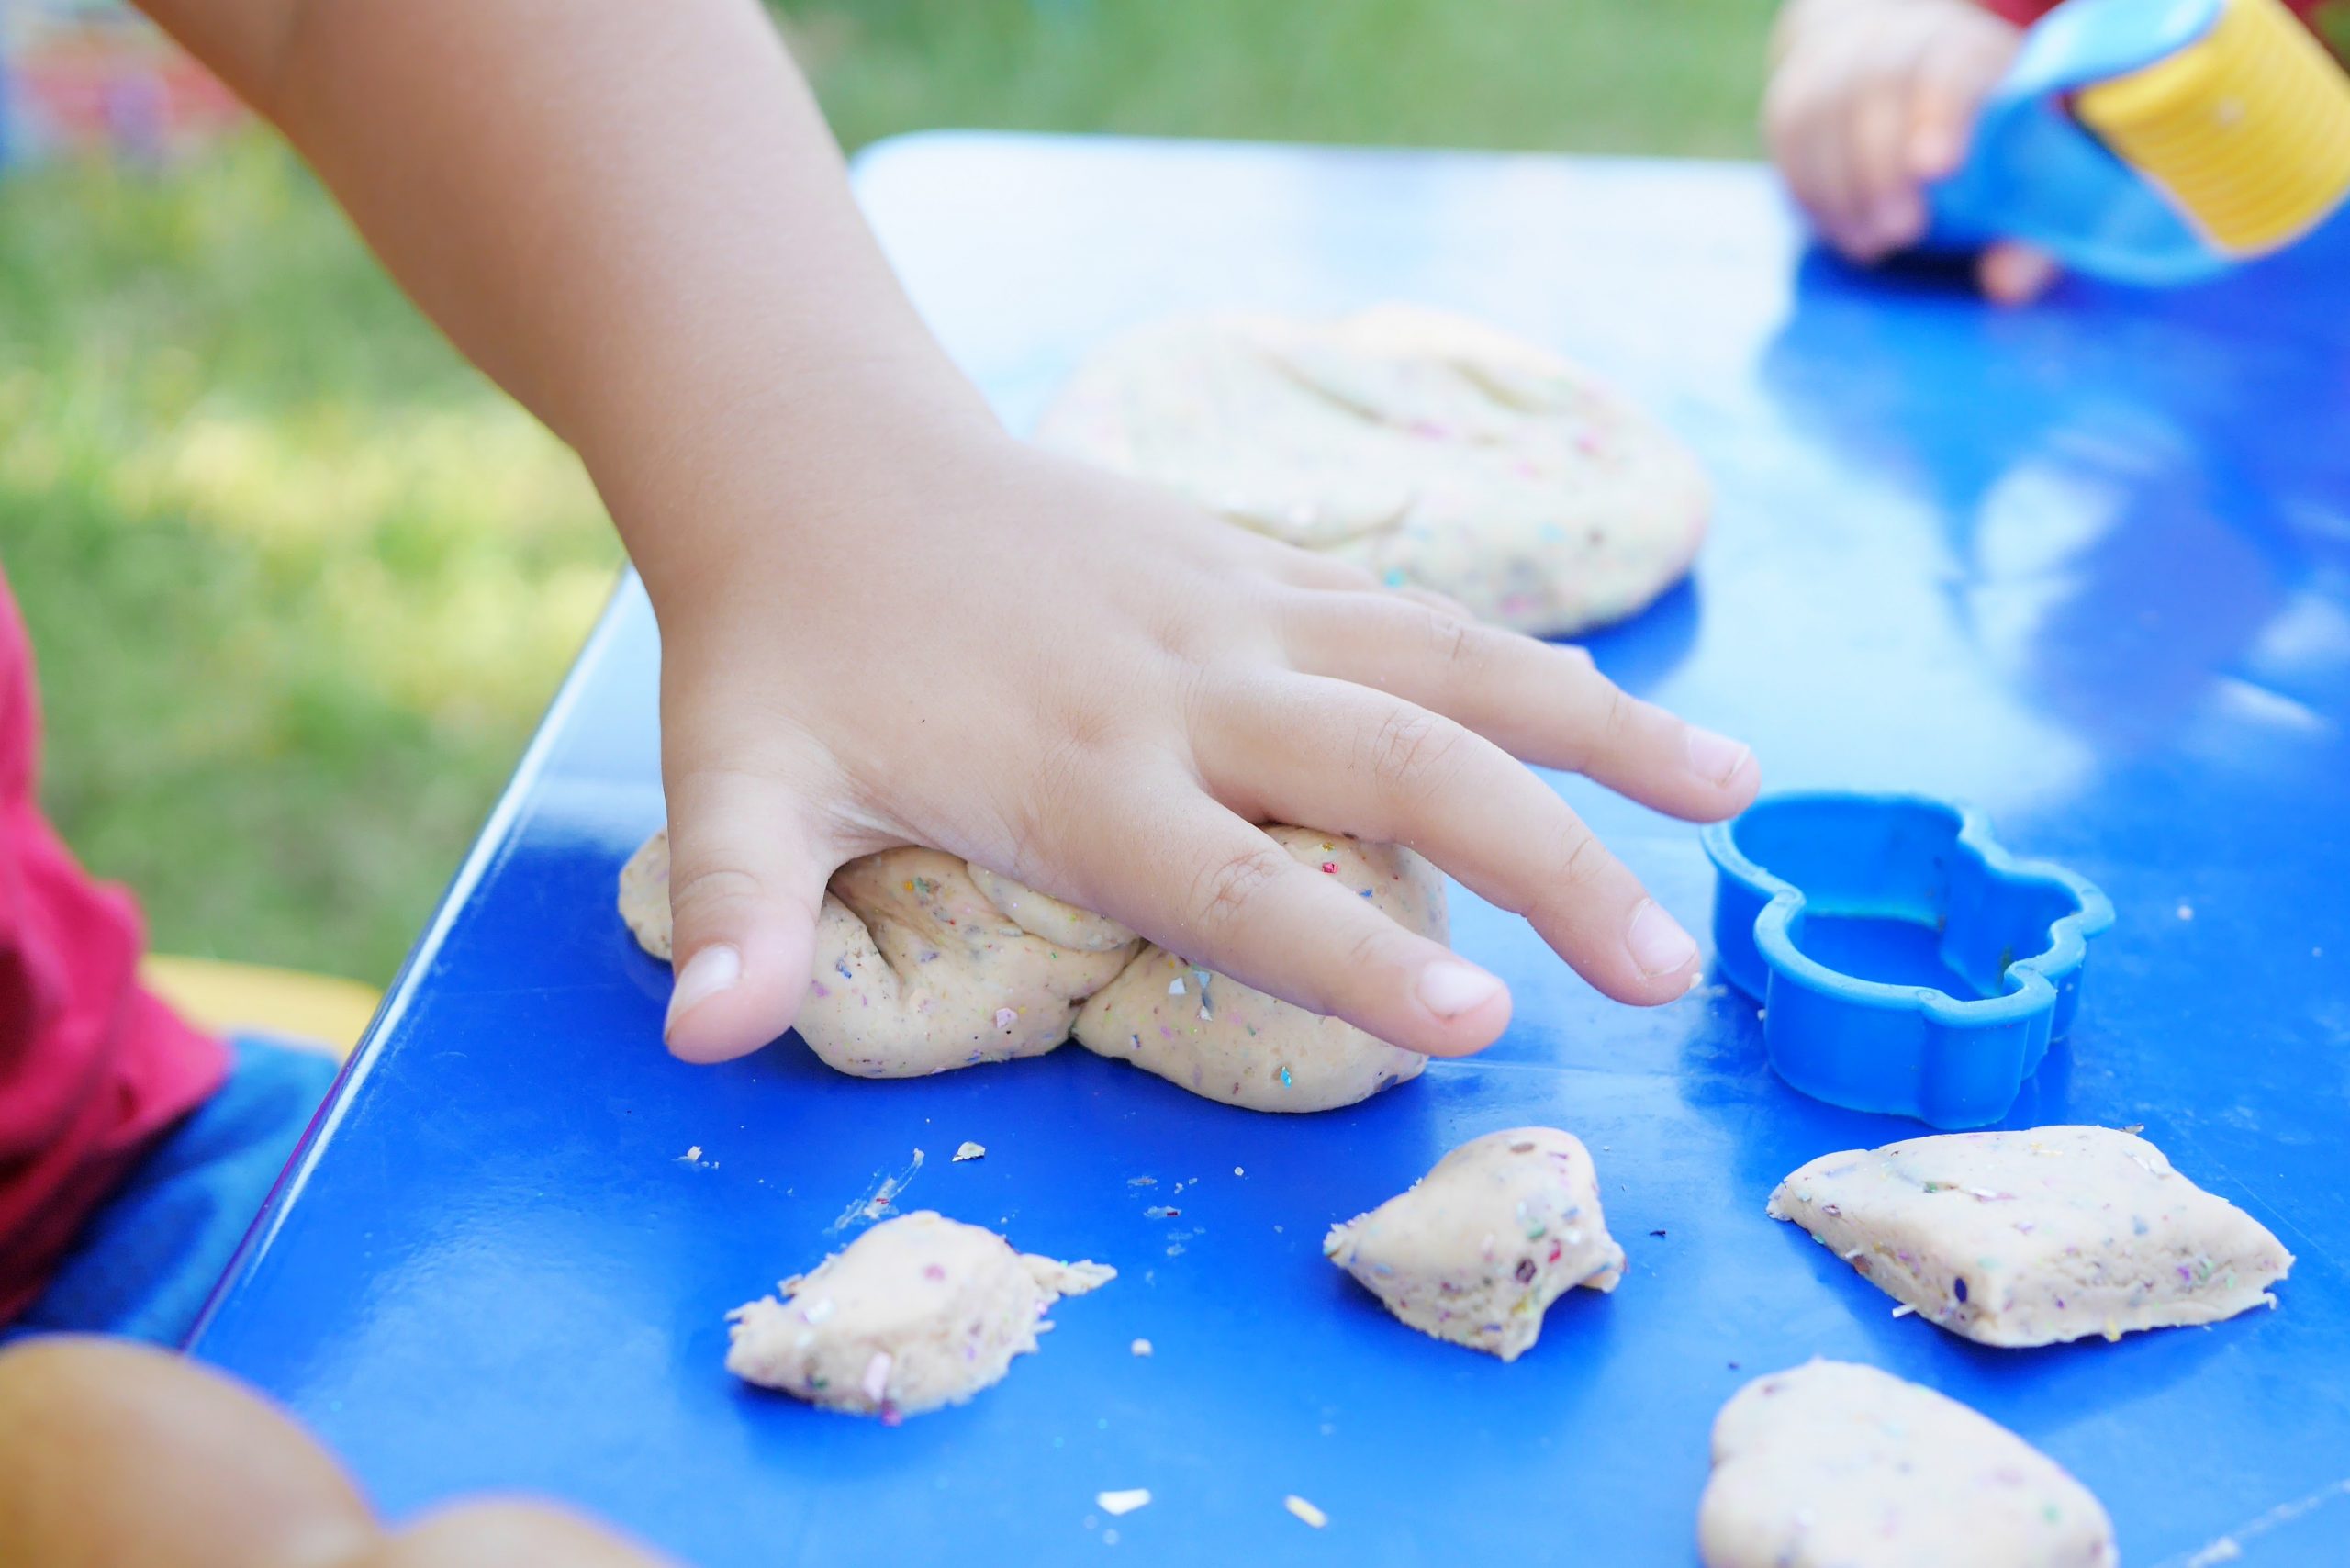 photo-of-child-s-hand-playing-clay-2425817 copy